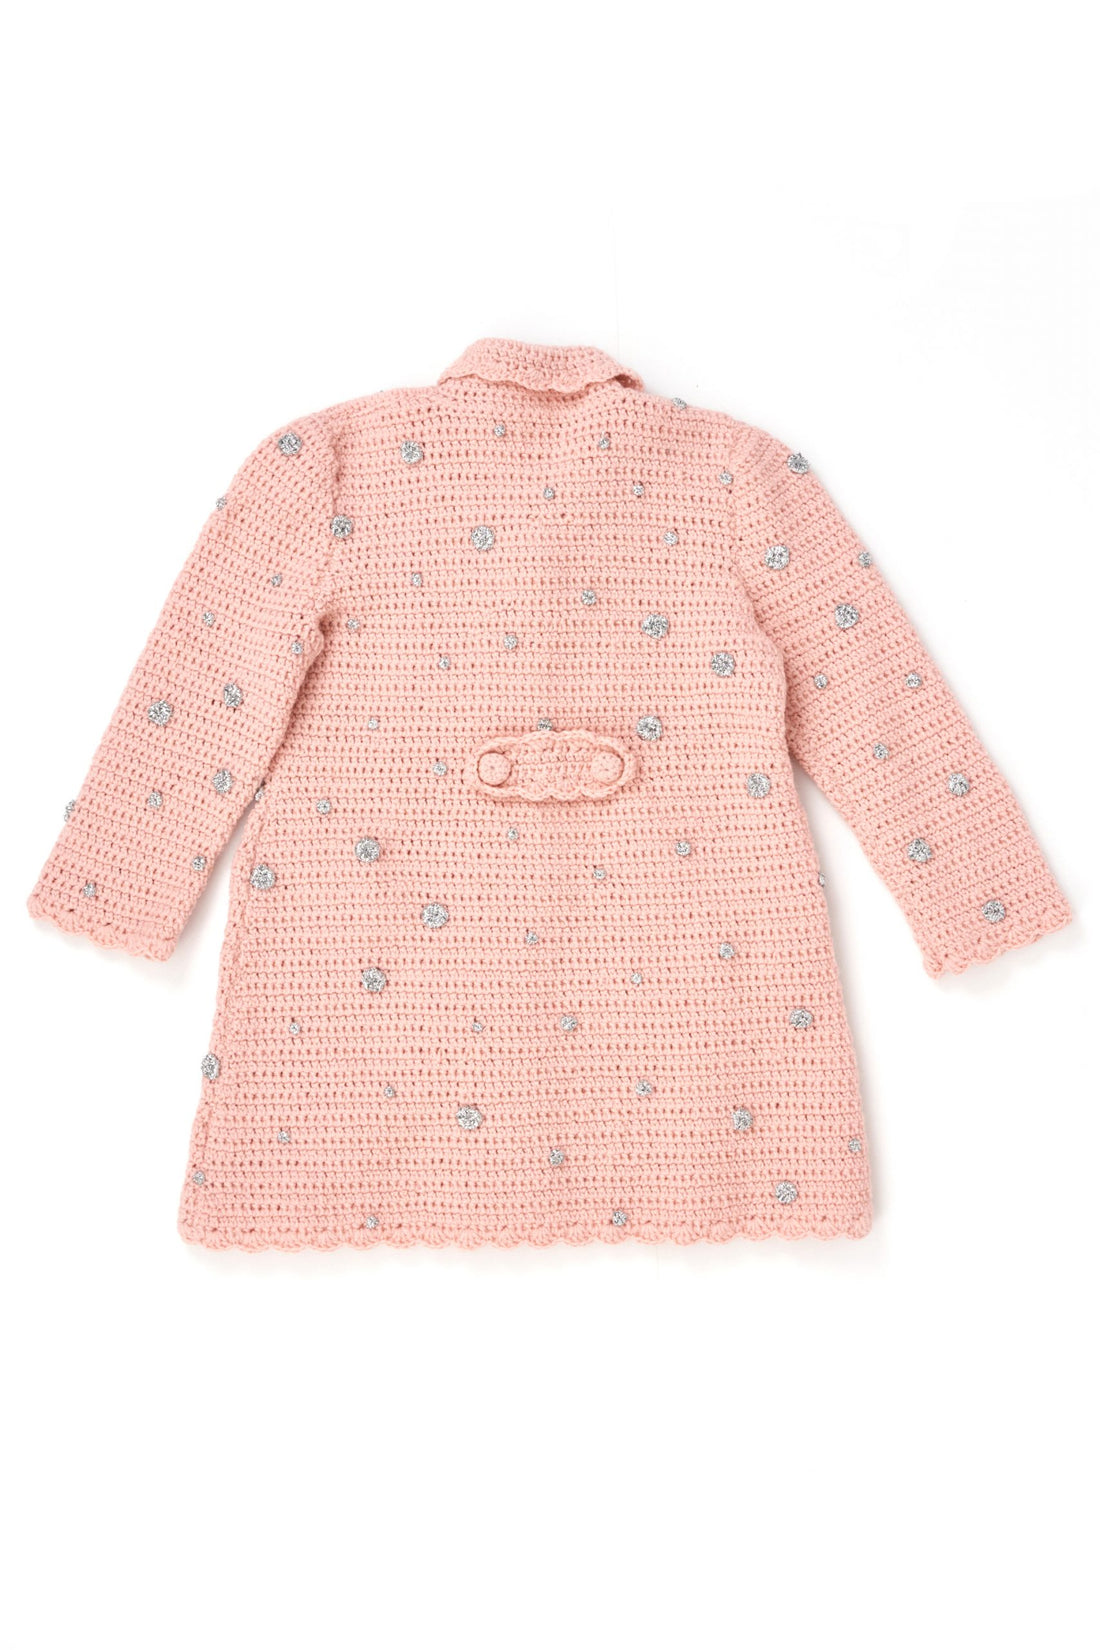 Dotted Coat Pink Silver